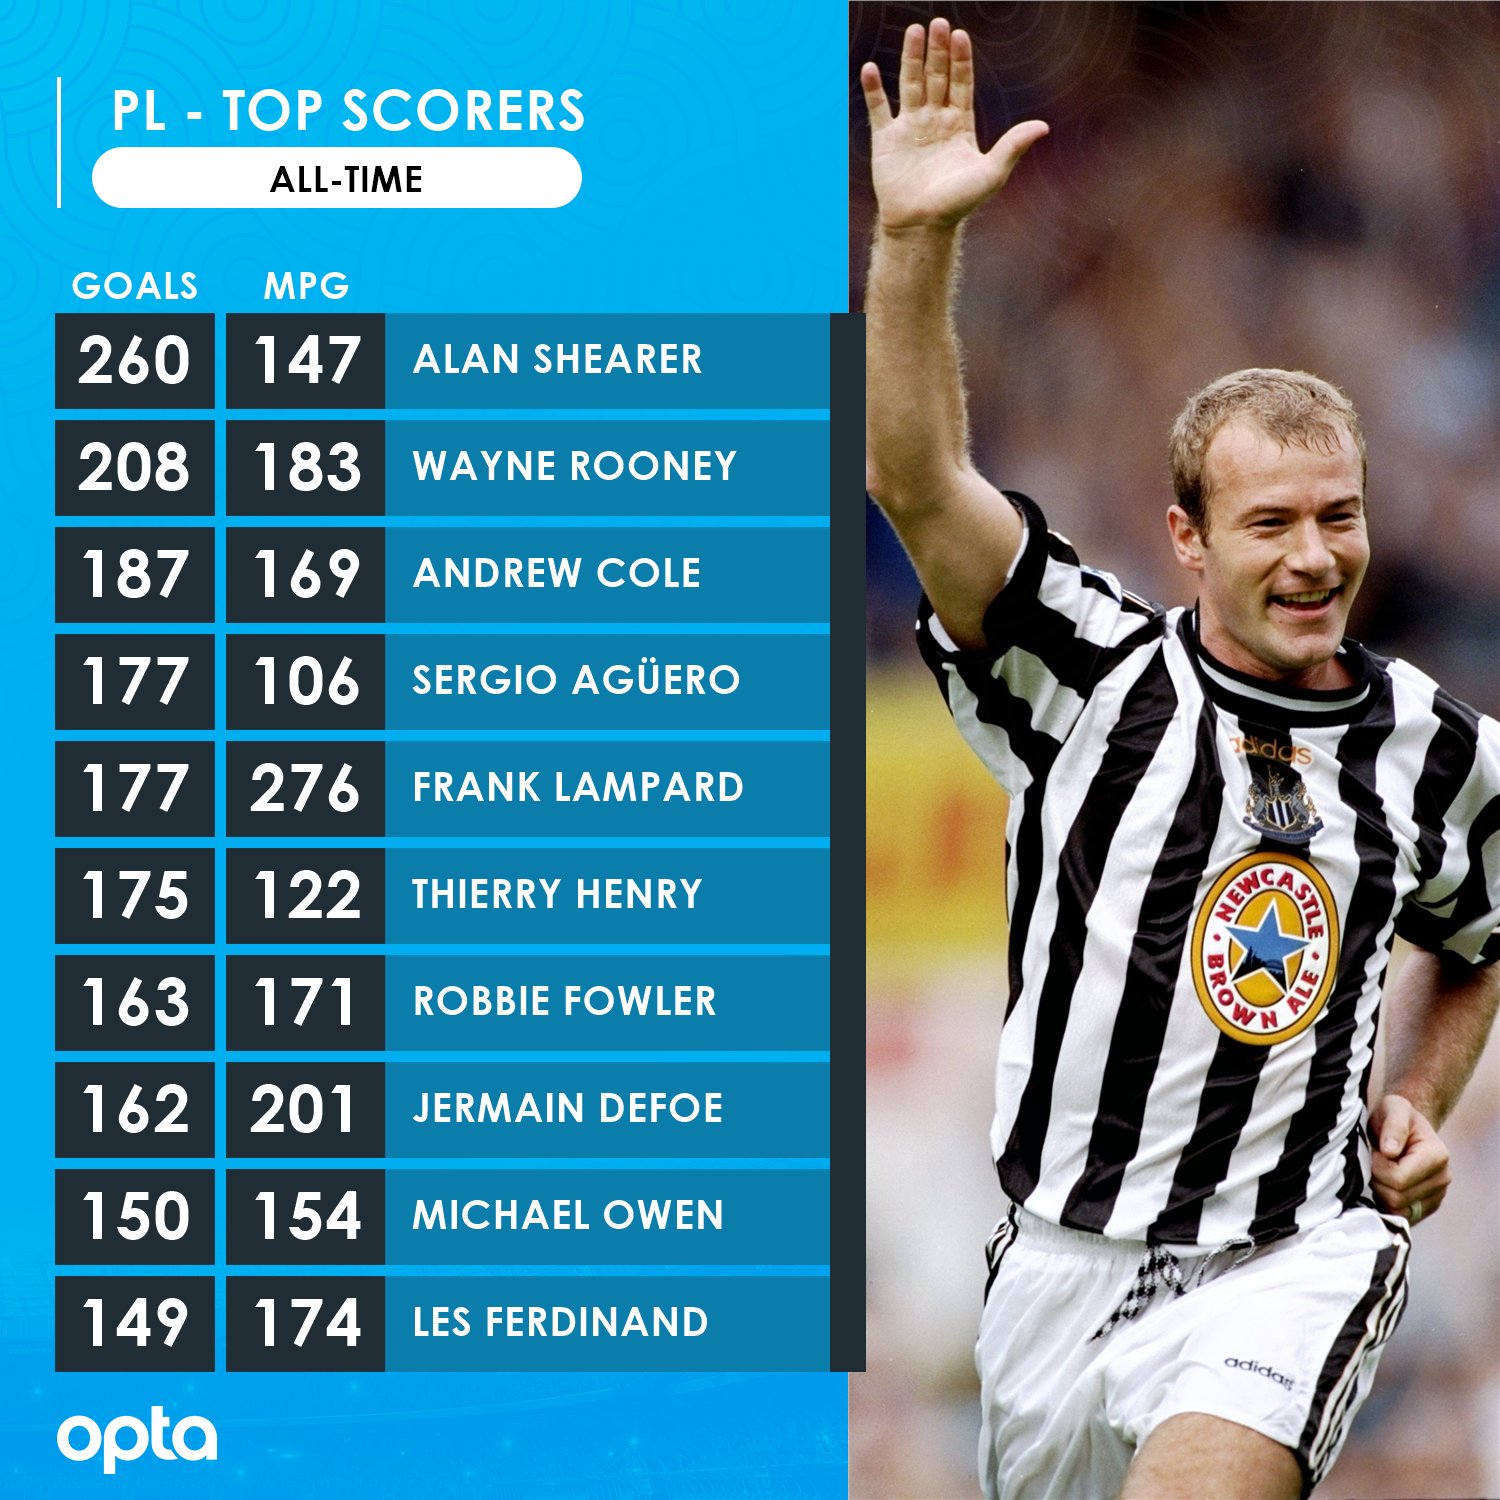 OptaJoe on Twitter: "10 The 10 highest scoring players in Premier League led by Alan Shearer on 260 goals, Sergio Agüero now joint-fourth with Frank Lampard. History. https://t.co/W4YO5AED9J" /